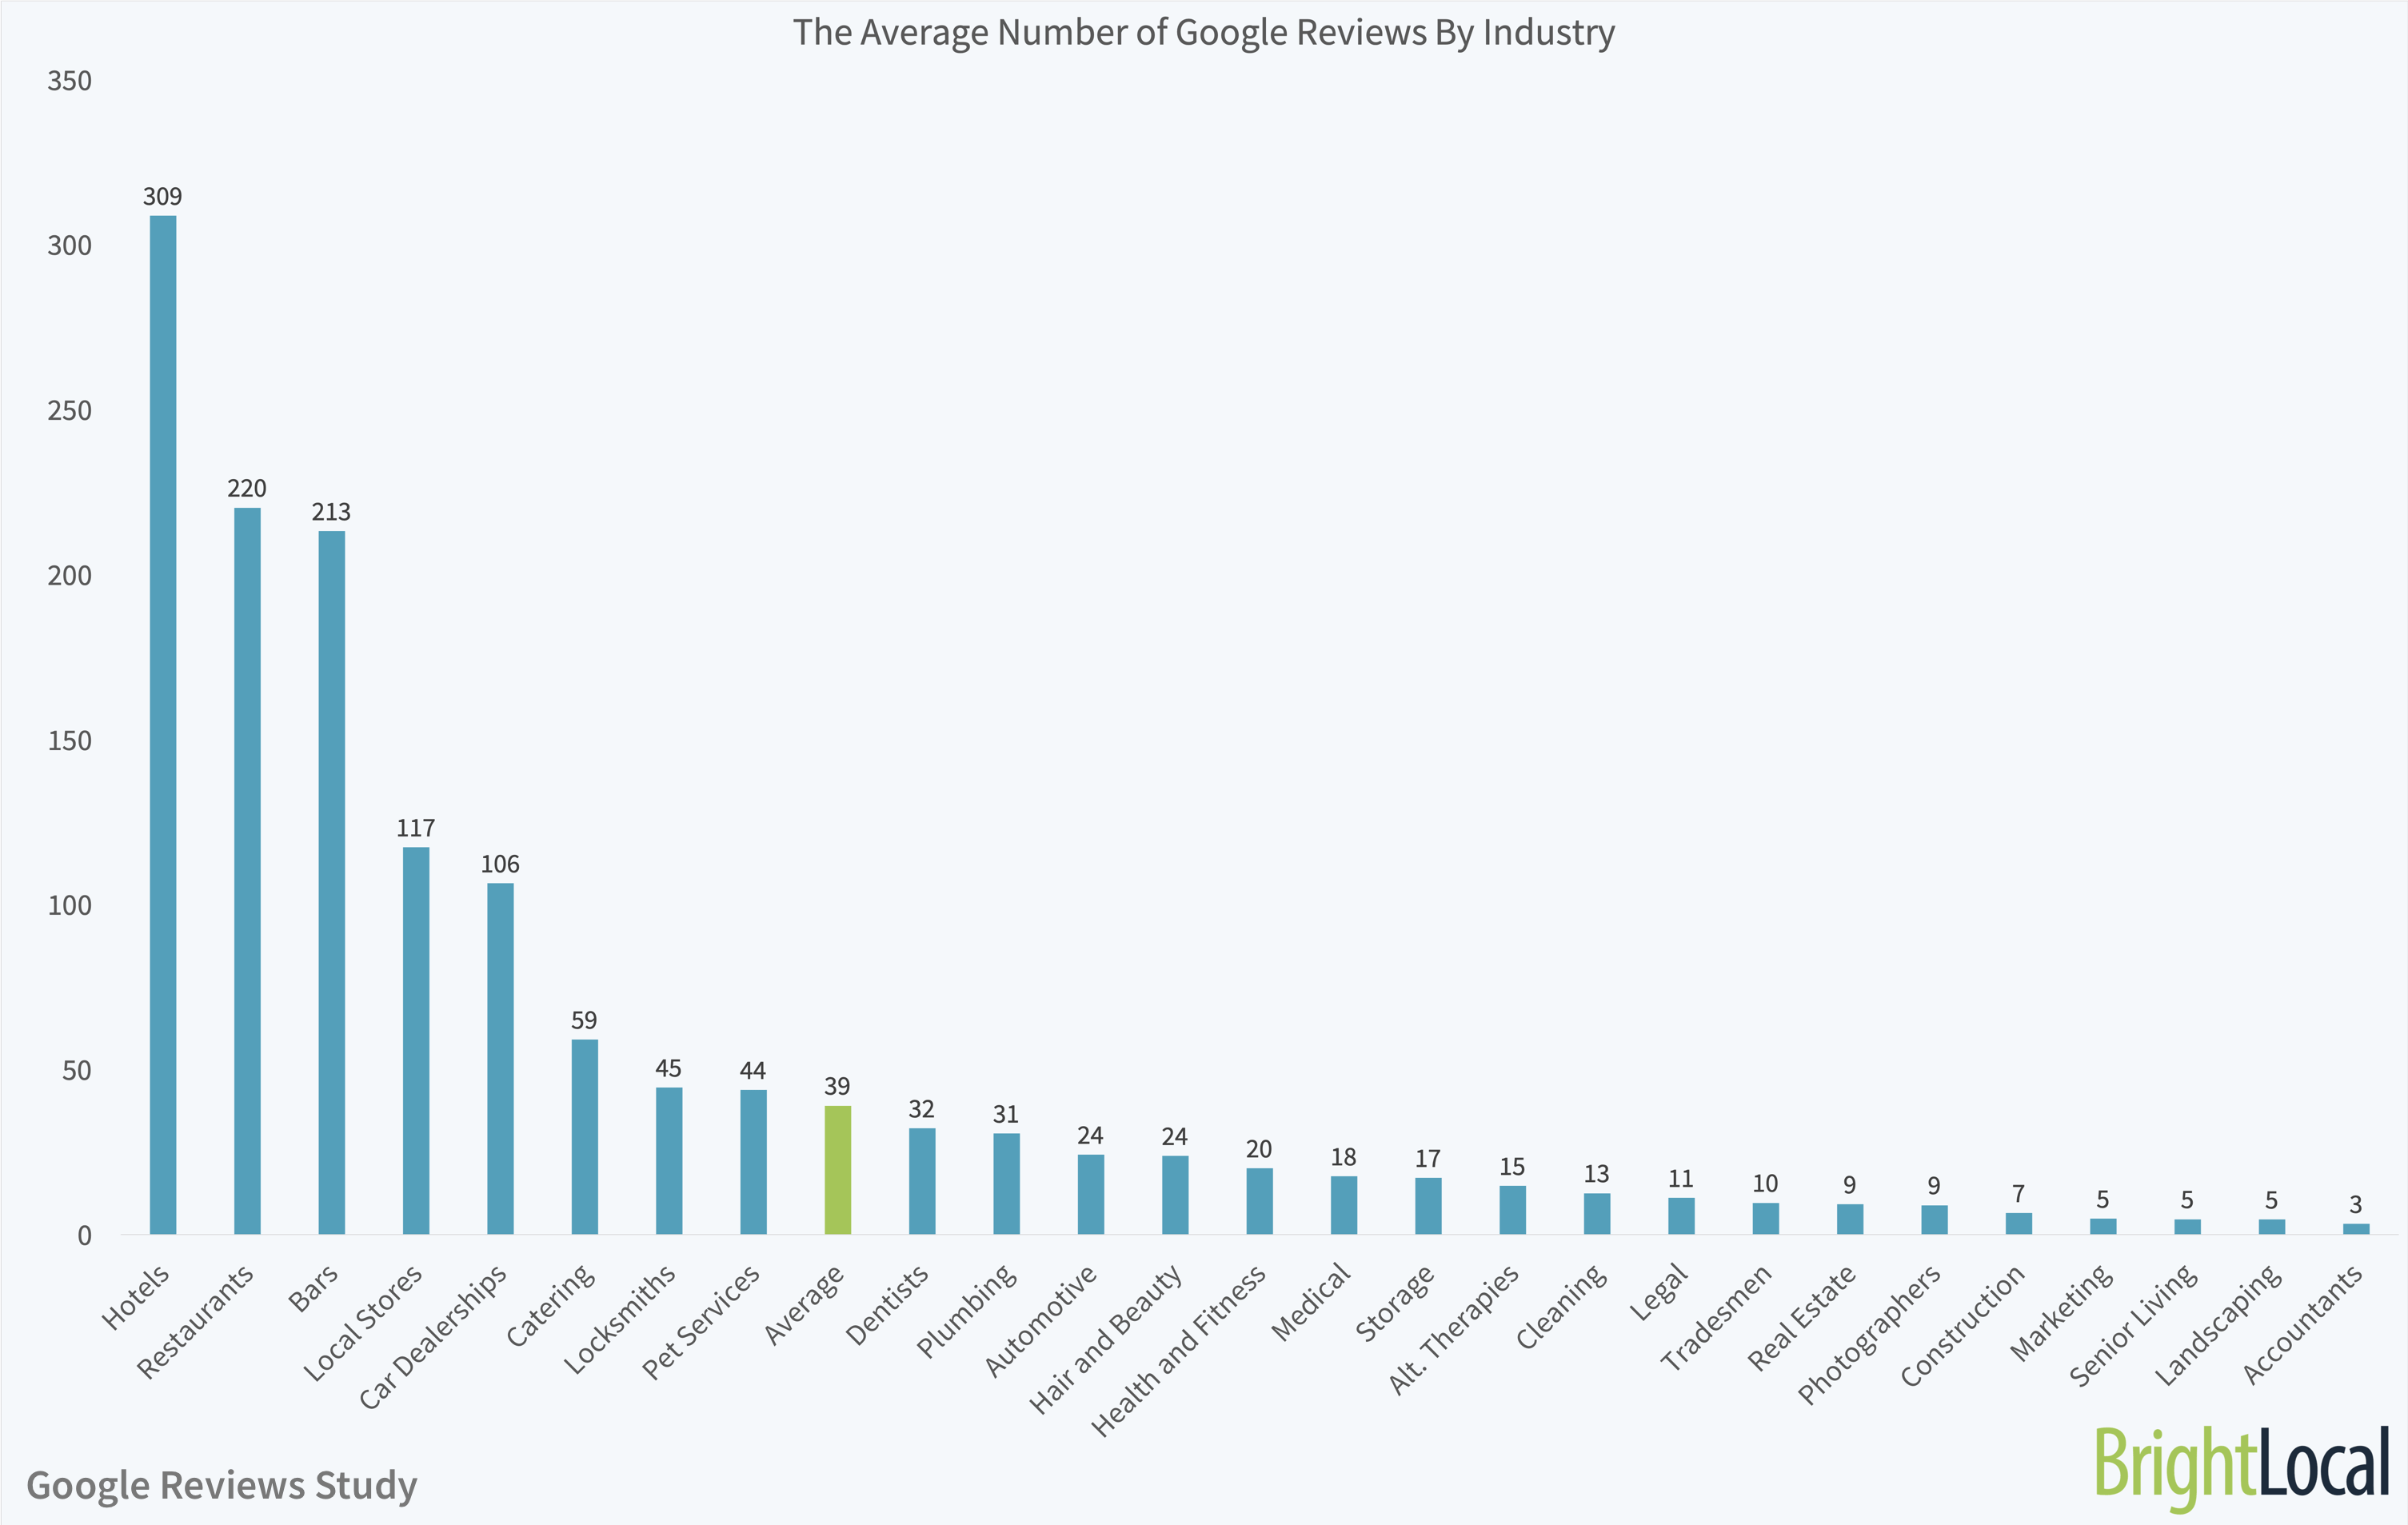 avg-number-of-google-reviews-by-industry-1